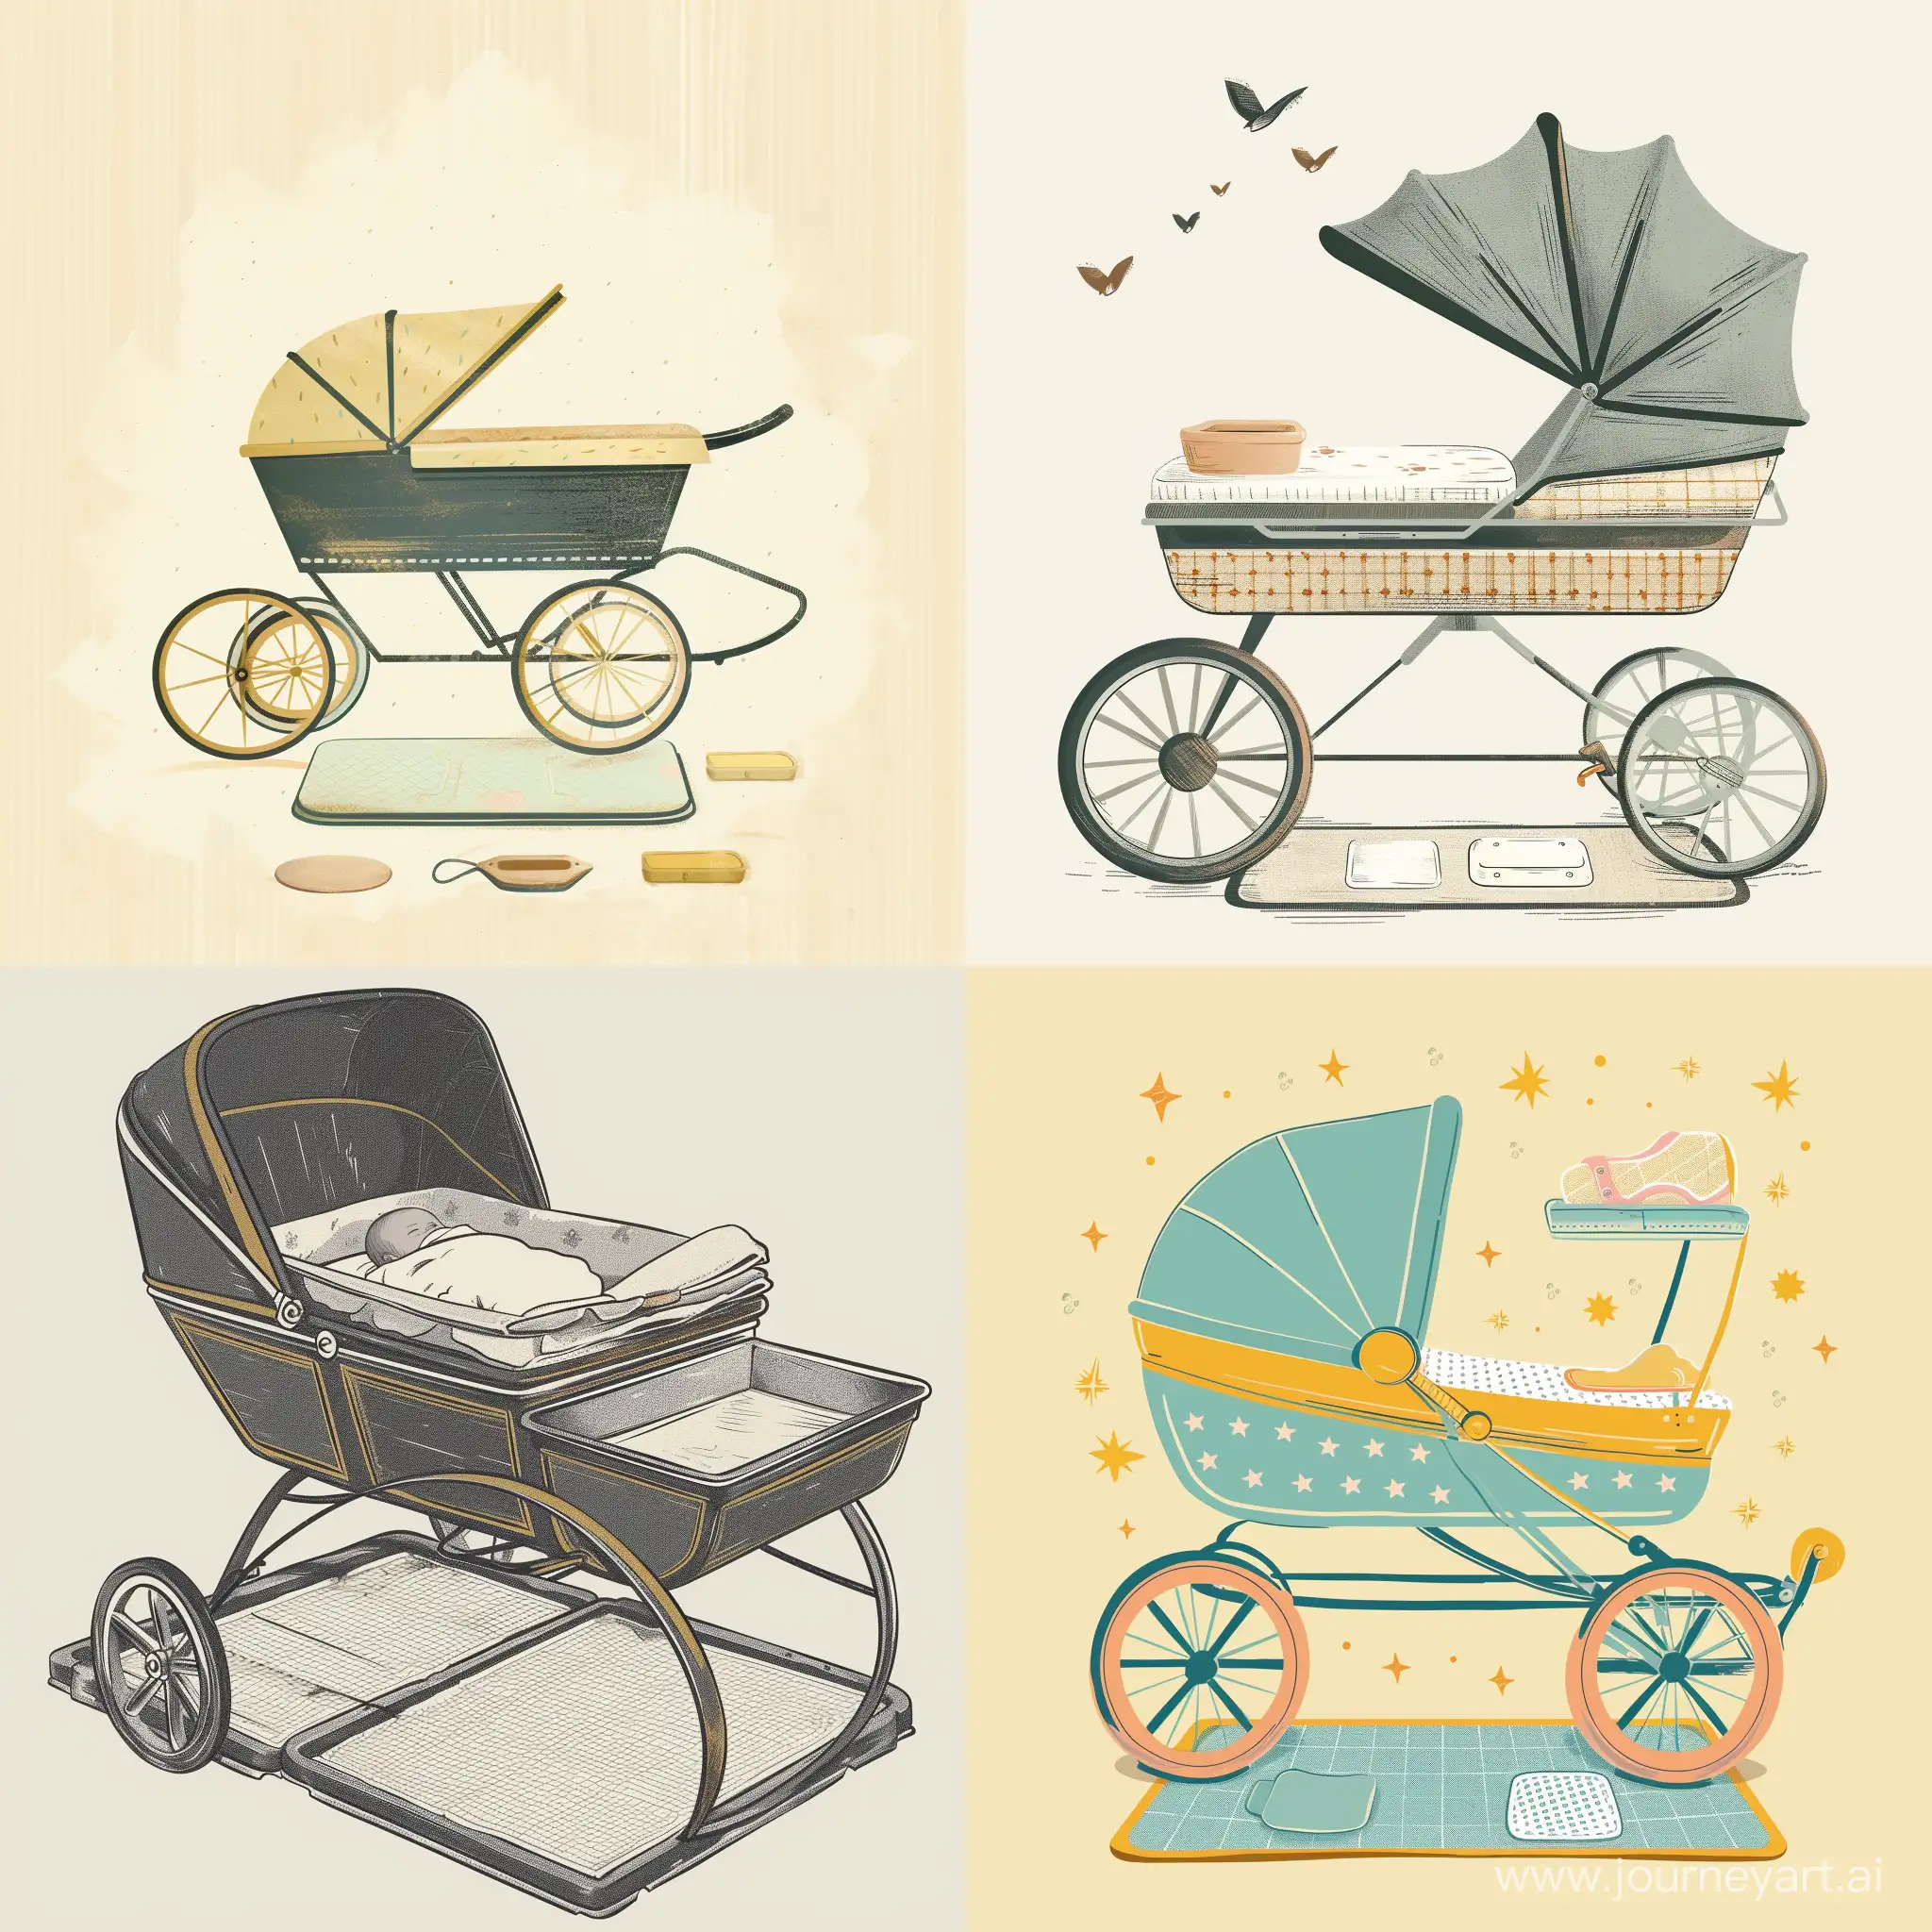 Empty-Baby-Carriage-Illustration-Depicting-Declining-Birth-Rates